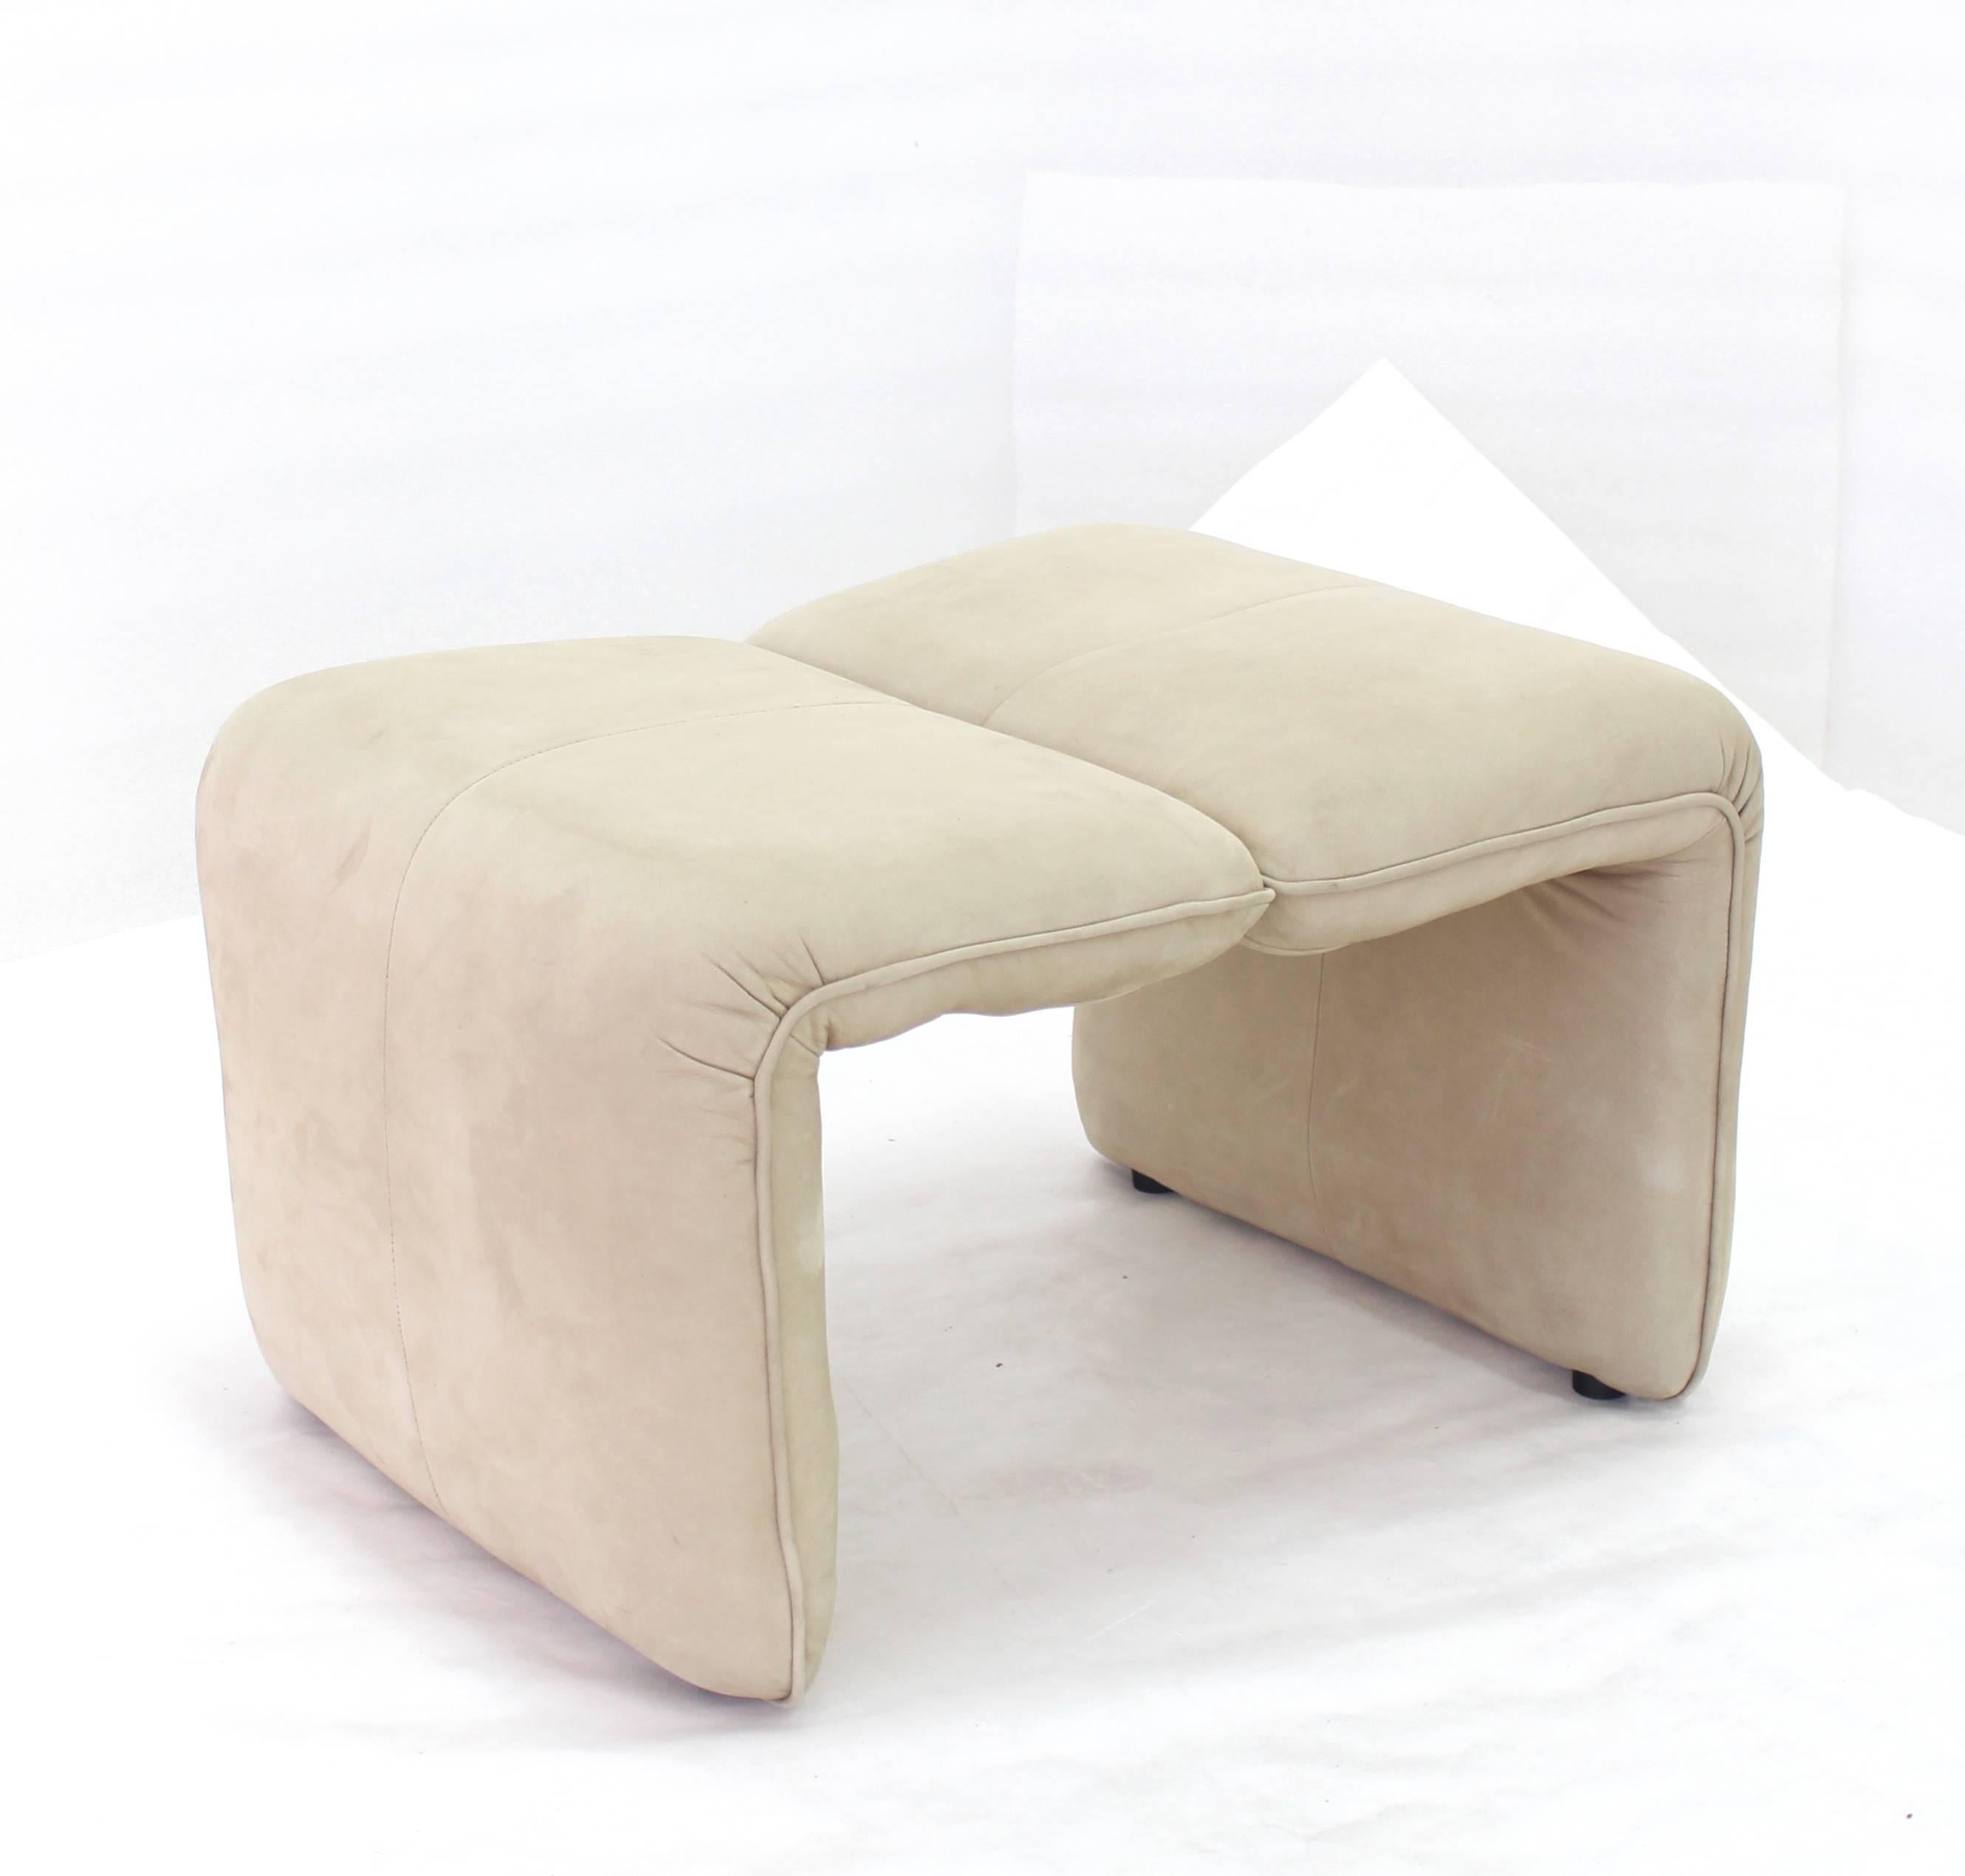 Beige Suede Leather Lounge Chair with Matching Ottoman In Excellent Condition For Sale In Rockaway, NJ